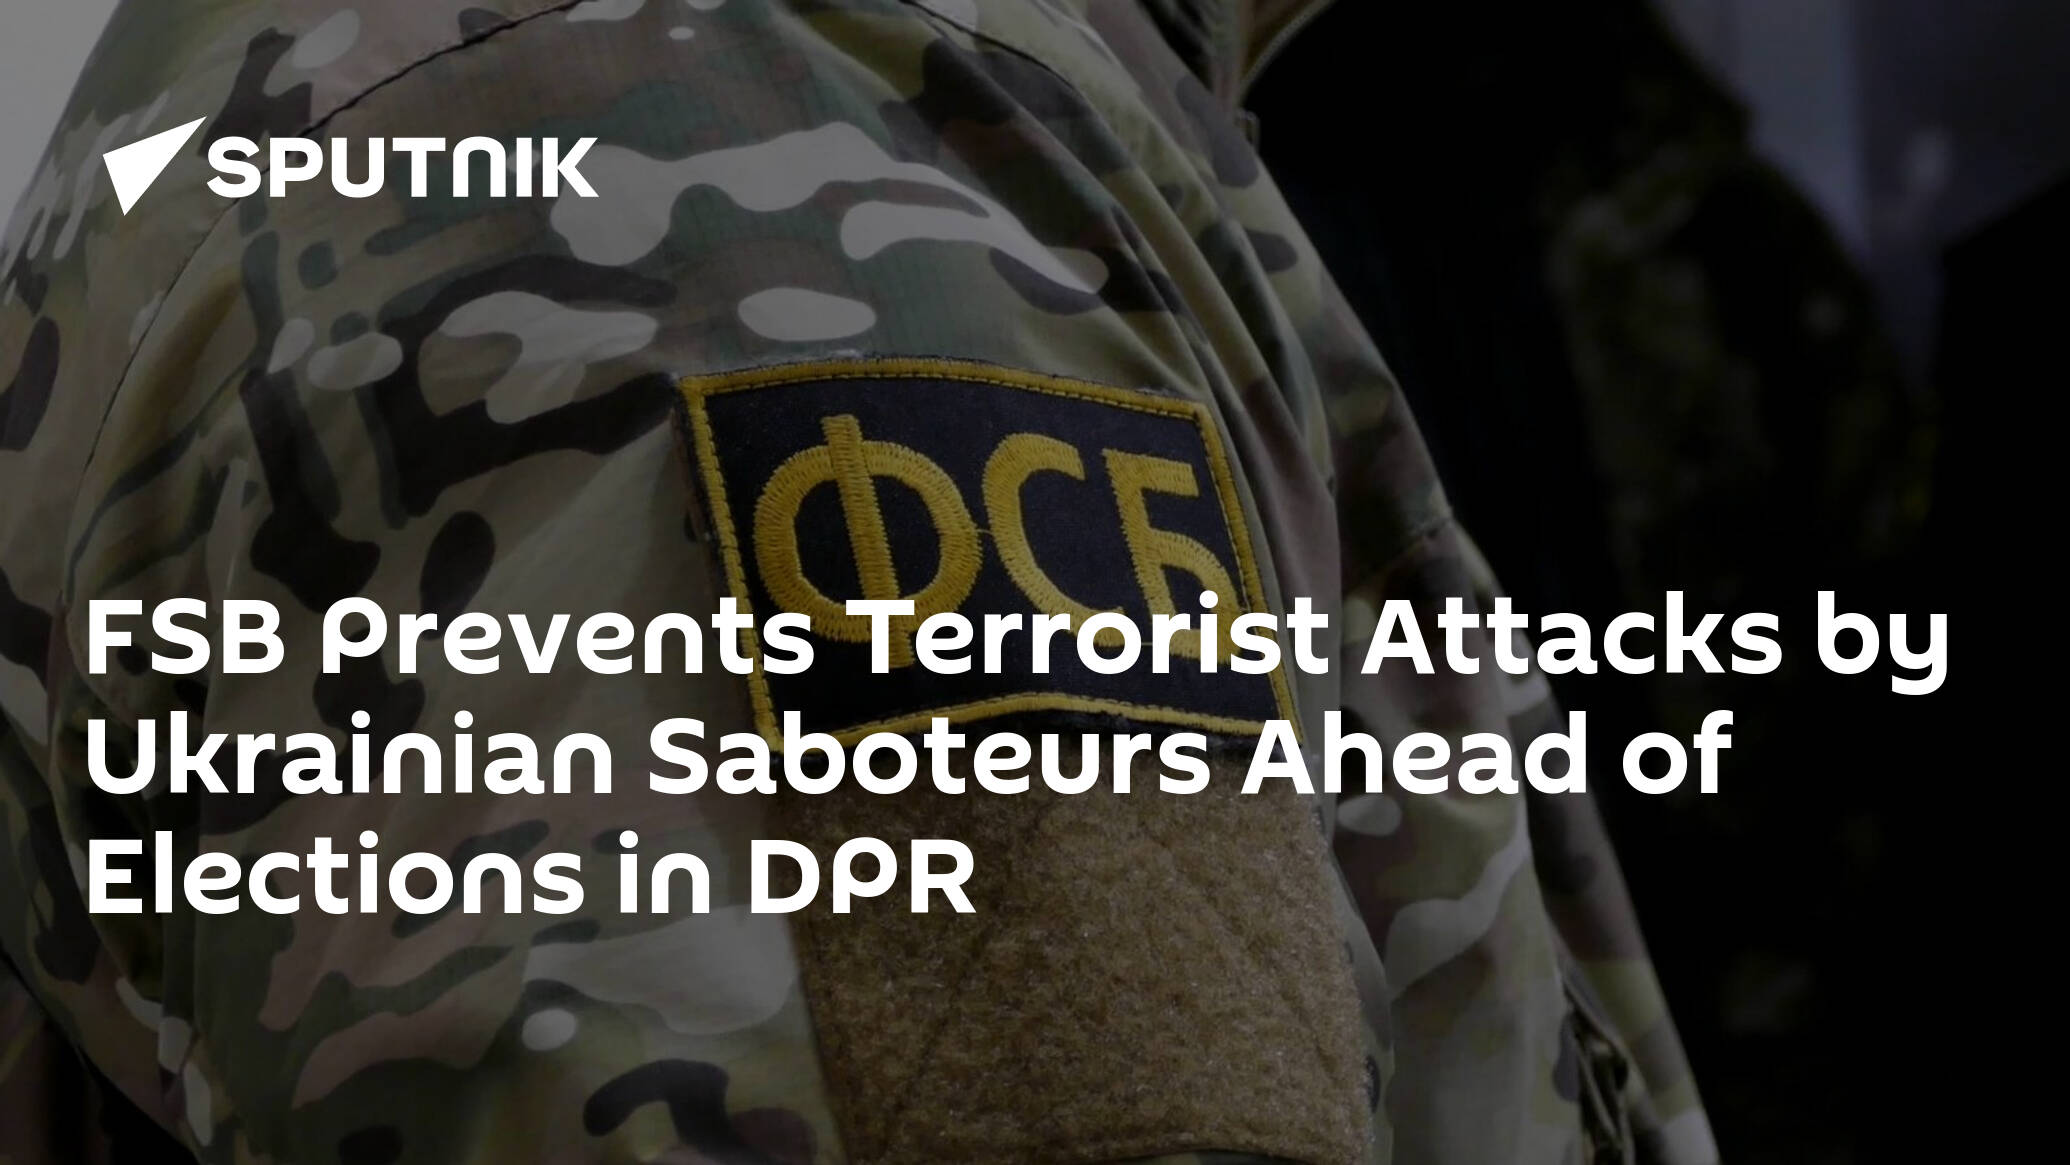 FSB Prevents Terrorist Attacks by Ukrainian Saboteurs Ahead of Elections in DPR